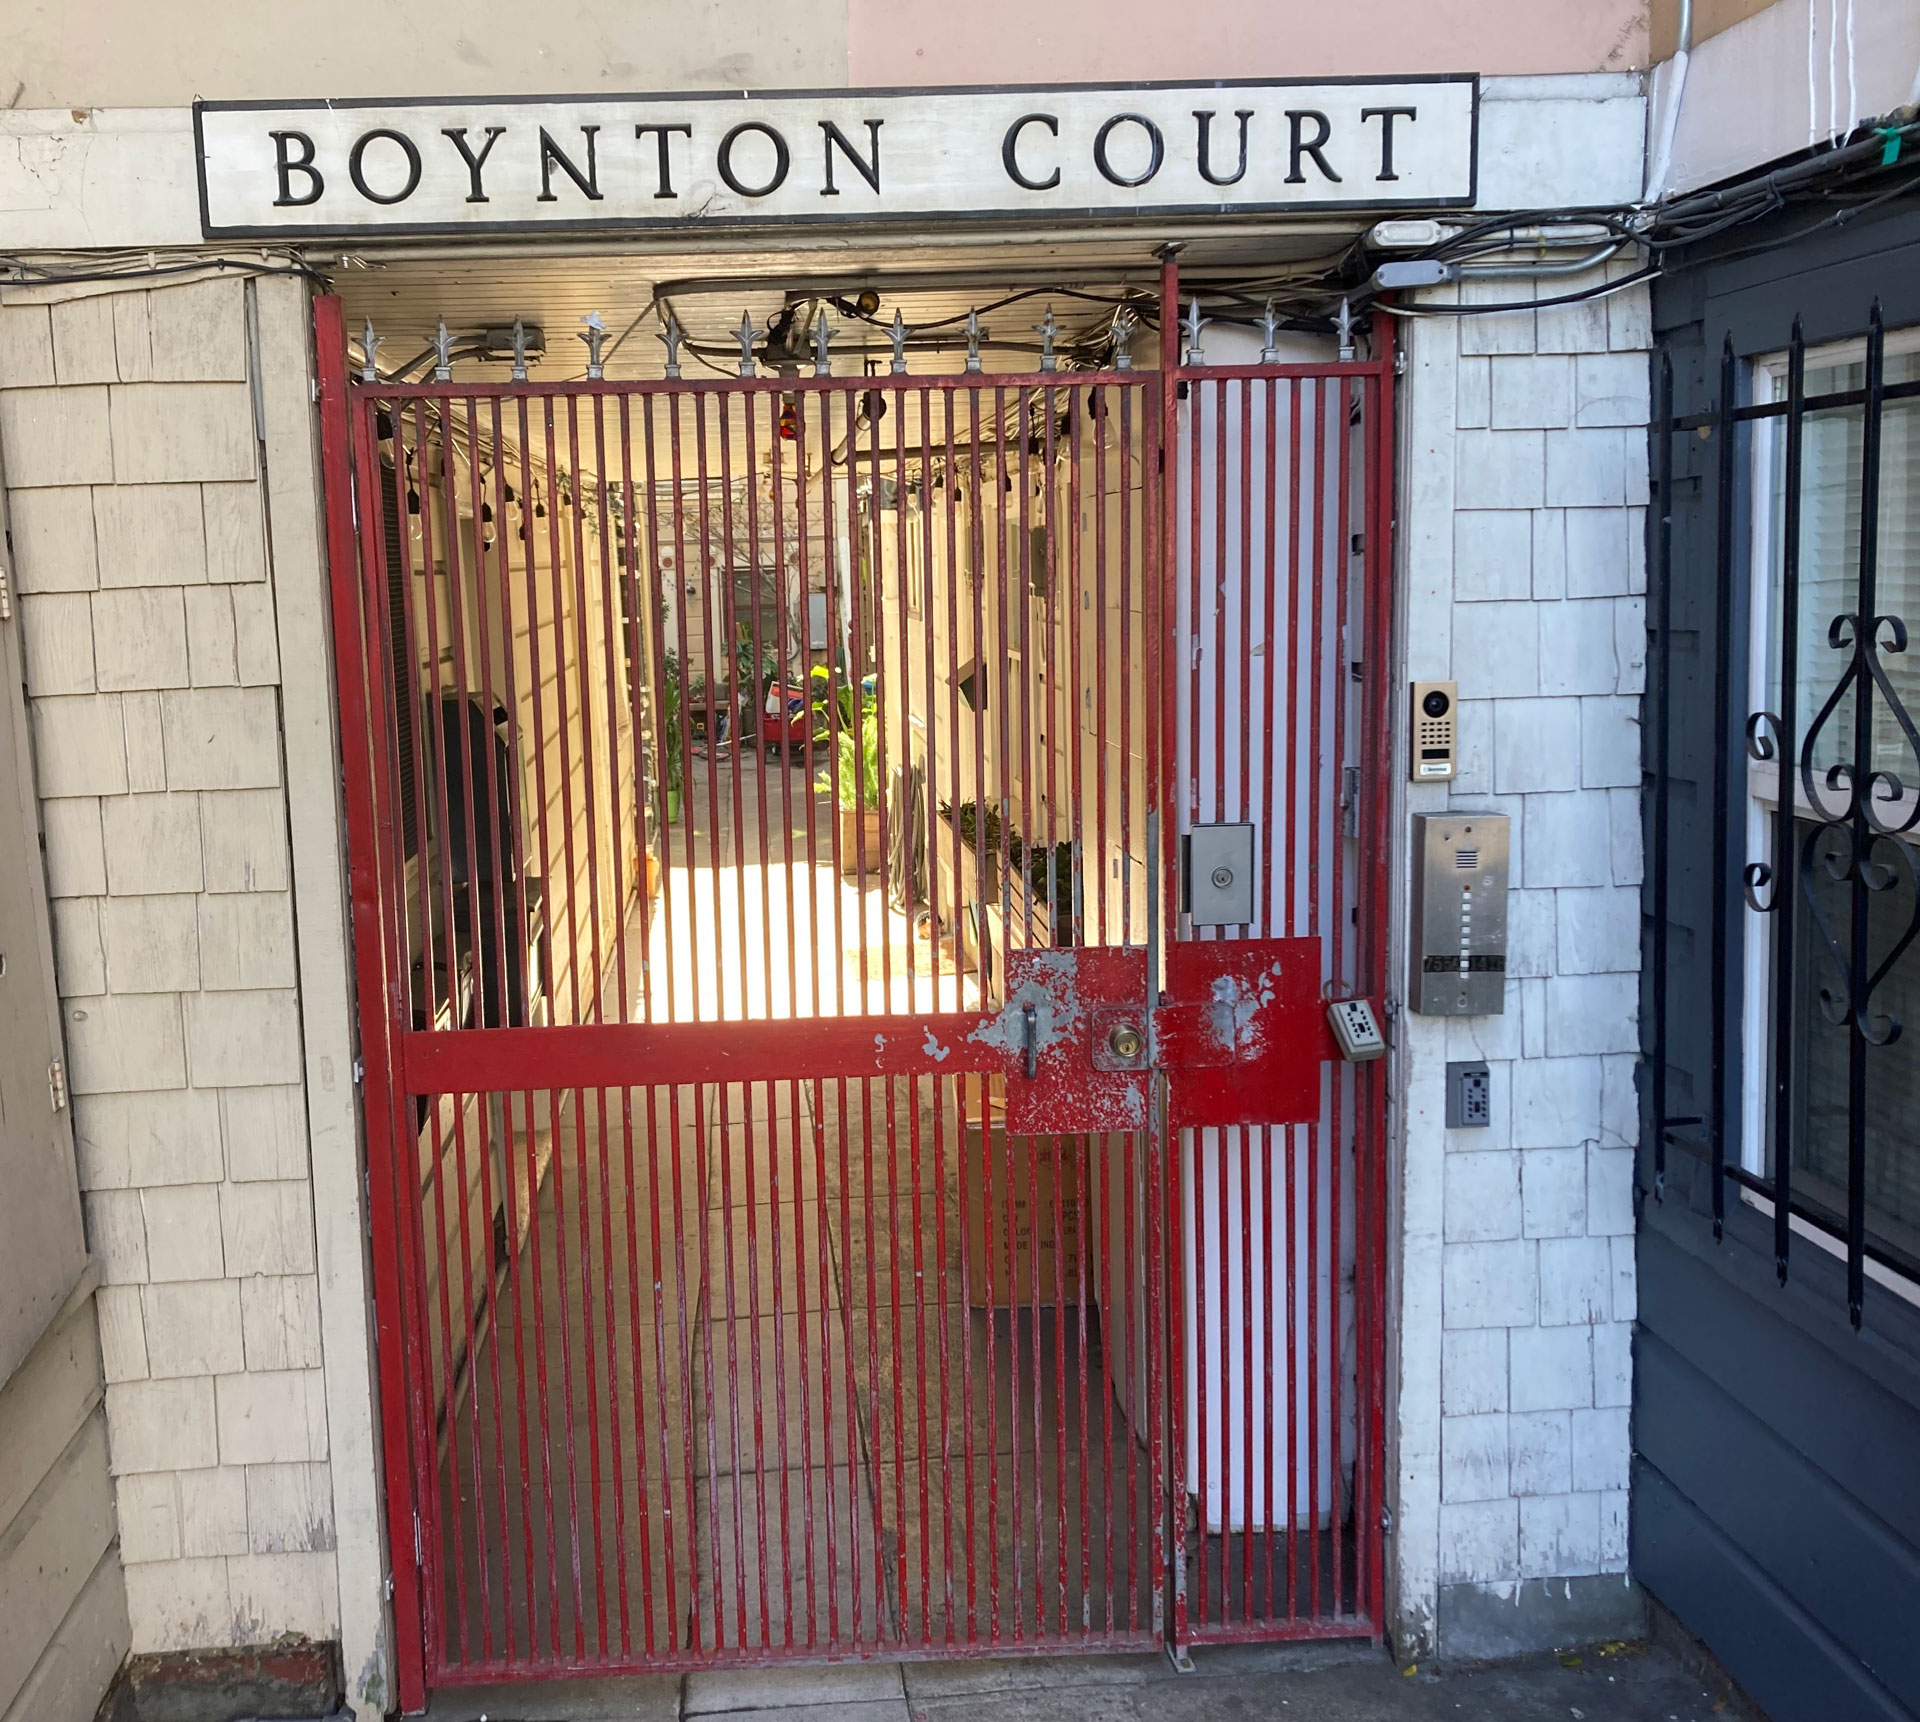 Through a red metal gate a passageway can be glimpsed with a sunny courtyard beyond. Above the gate a sign reads Boynton Court.